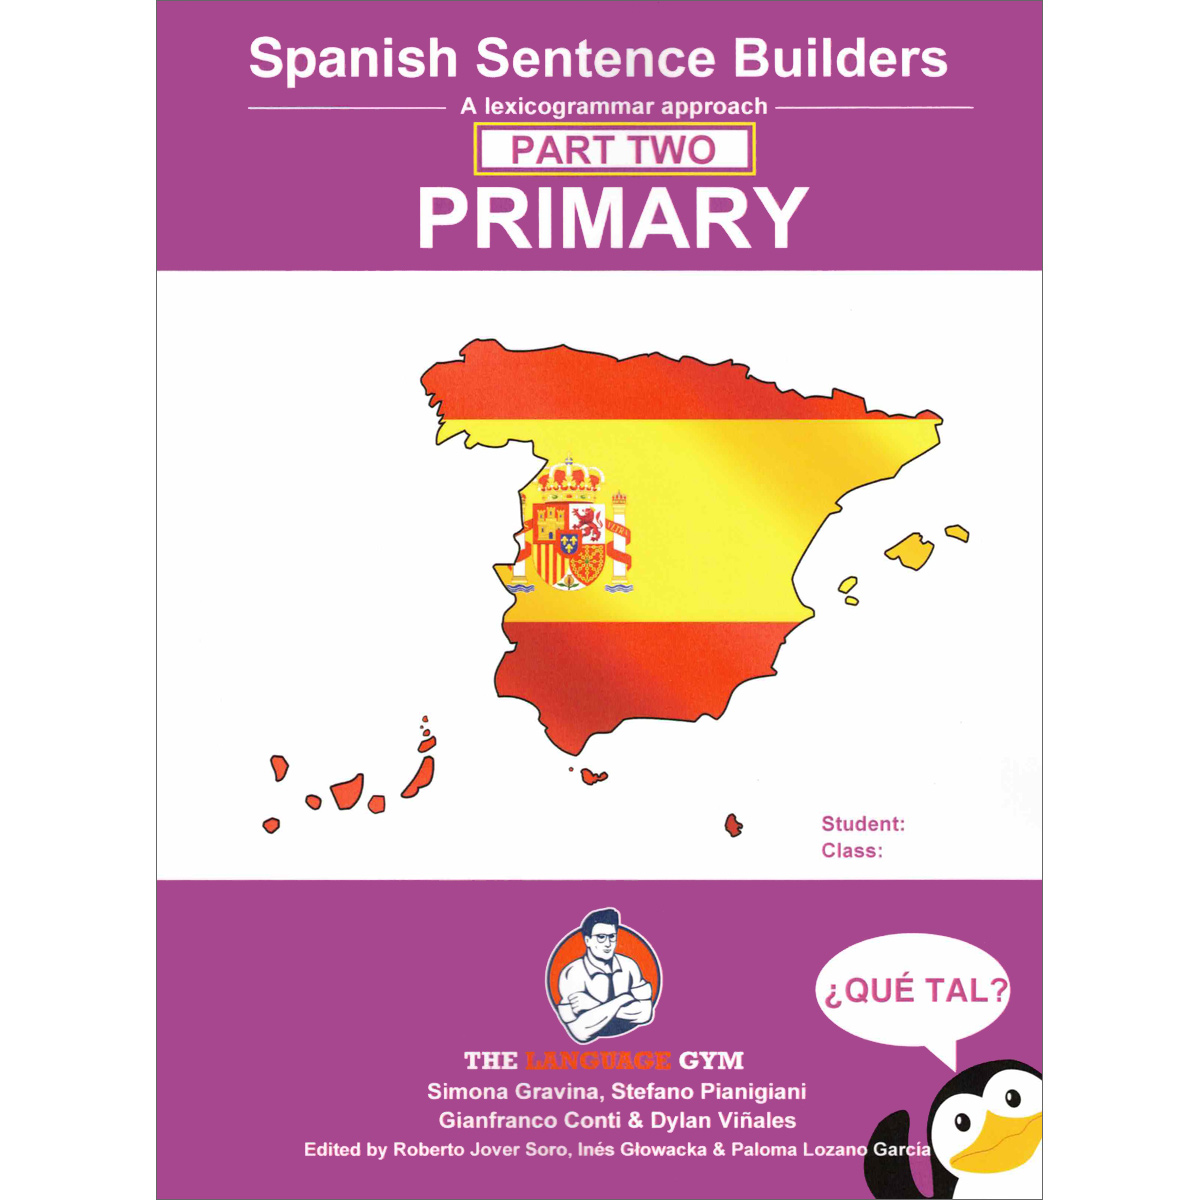 Spanish Sentence Builders - Primary (Part Two)